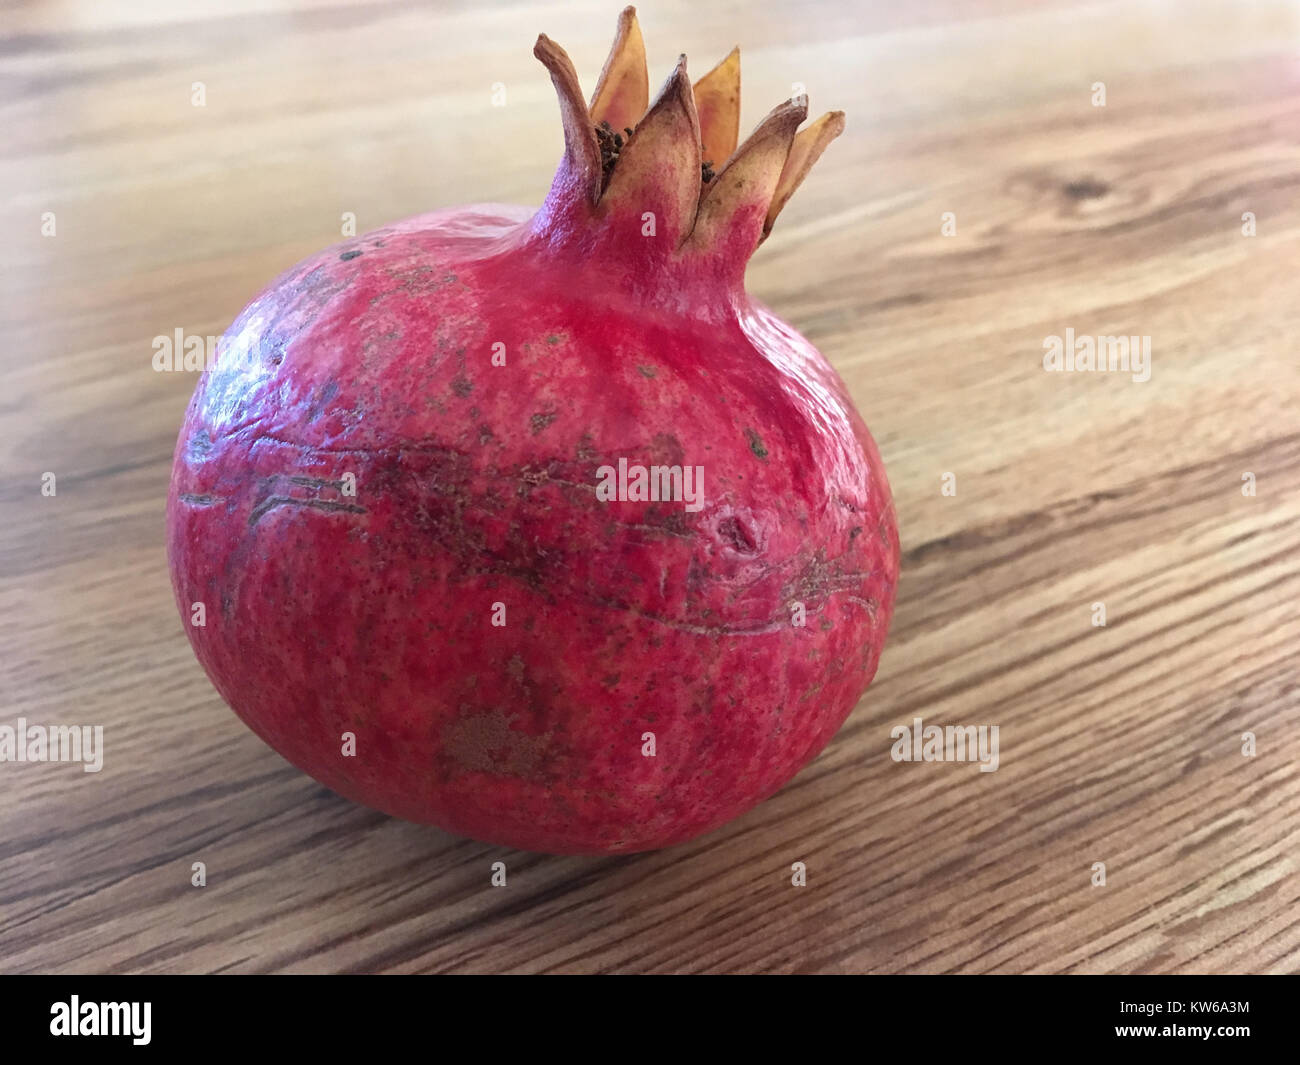 Pomegranate on wood grained table Stock Photo